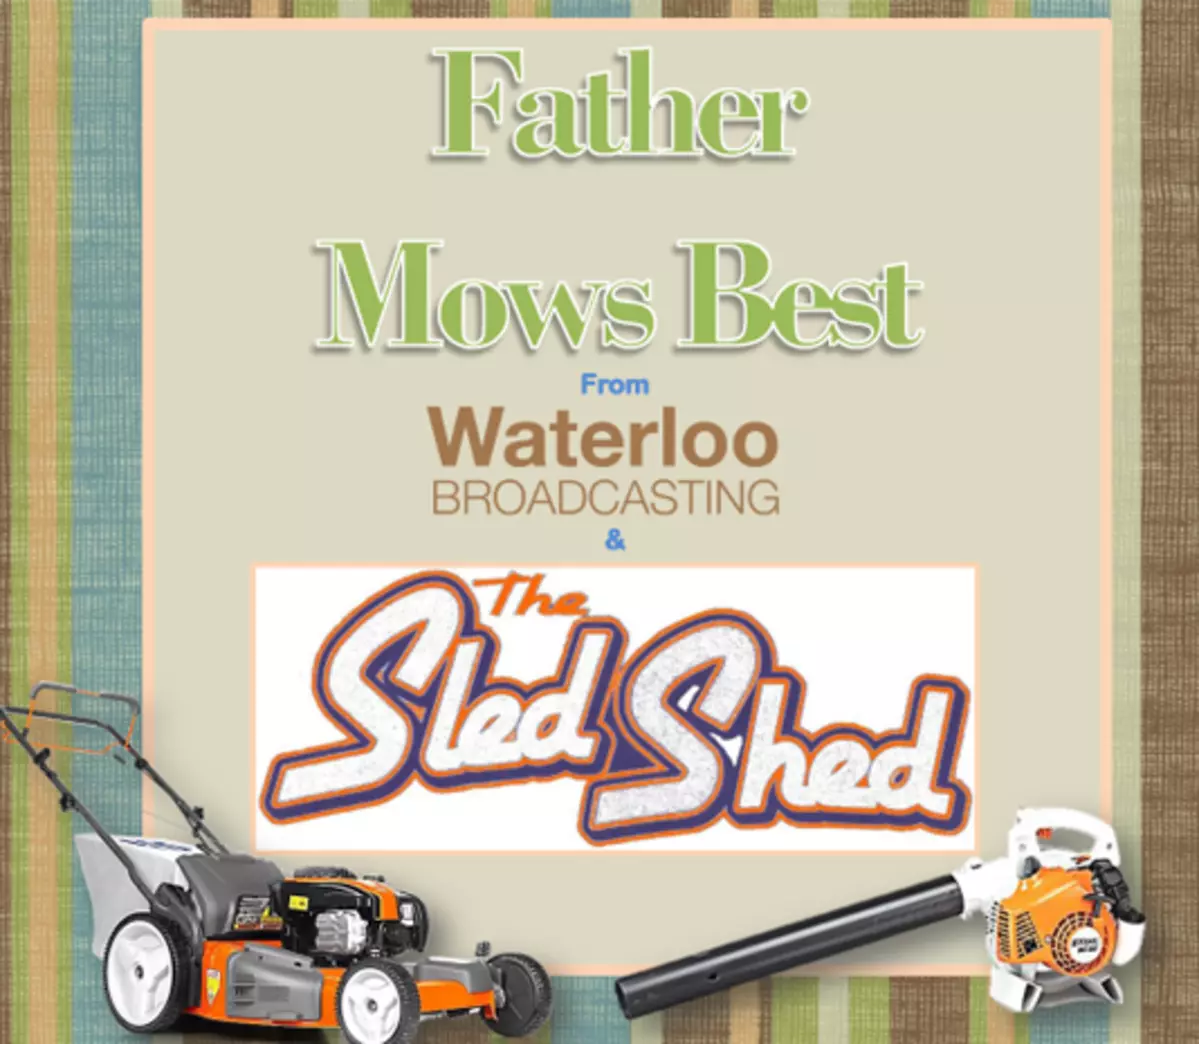 Download 'Father Mows Best' Winner Announced